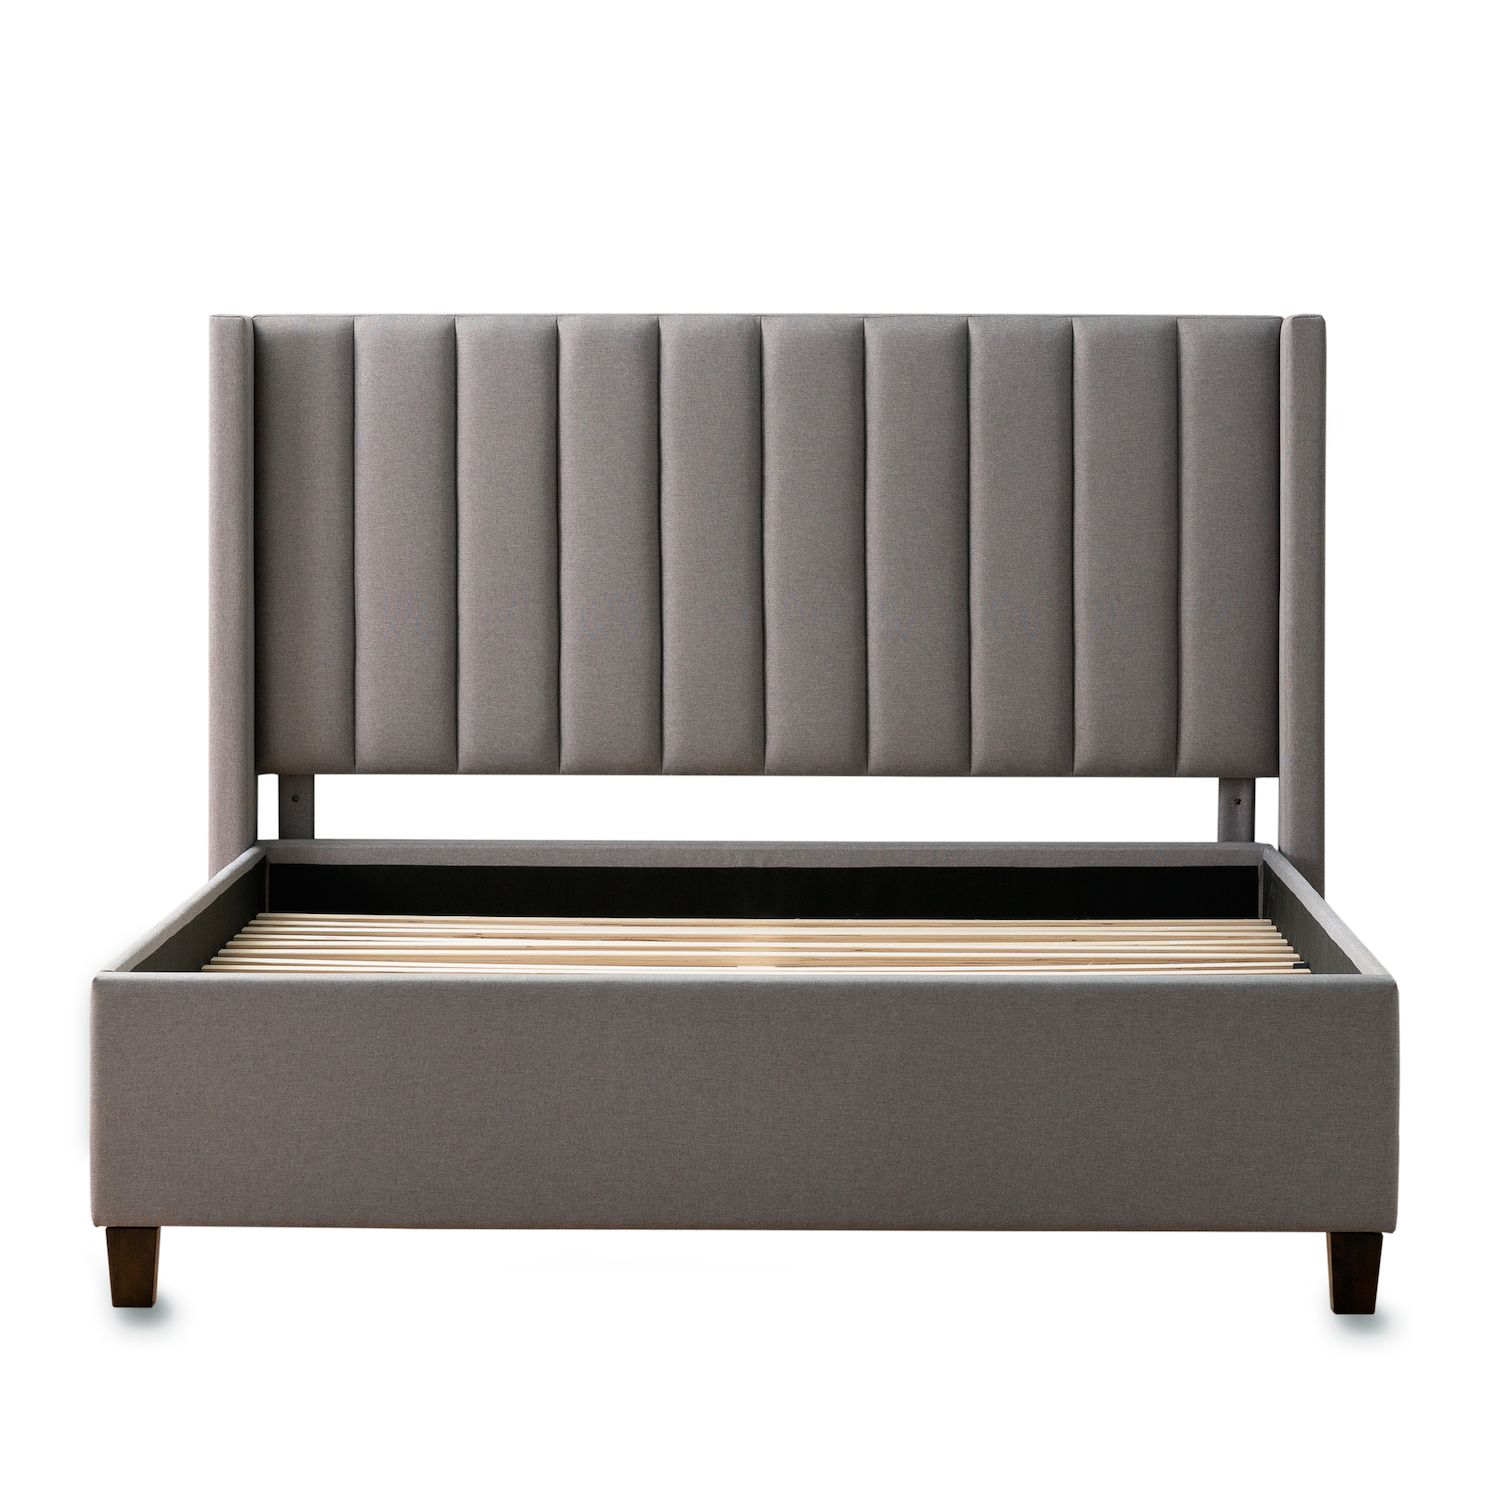 Image for Dream Collection Lucid Wingback Upholstered Bed with Vertical Channels at Kohl's.